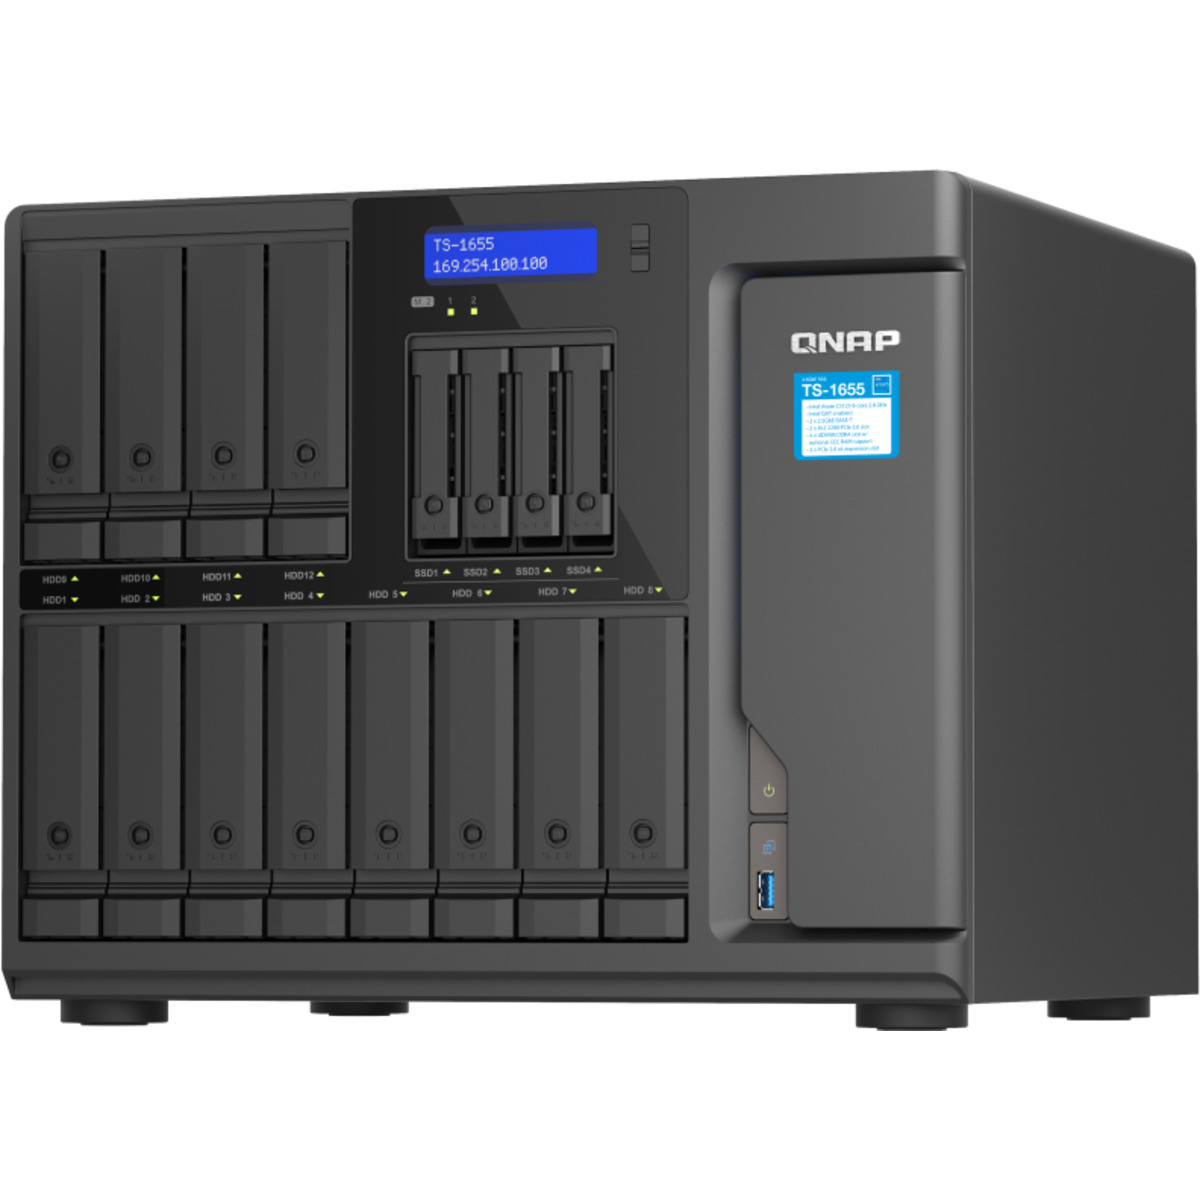 QNAP TS-1655 140tb 12+4-Bay Desktop Multimedia / Power User / Business NAS - Network Attached Storage Device 7x20tb Seagate IronWolf Pro ST20000NT001 3.5 7200rpm SATA 6Gb/s HDD NAS Class Drives Installed - Burn-In Tested - FREE RAM UPGRADE TS-1655